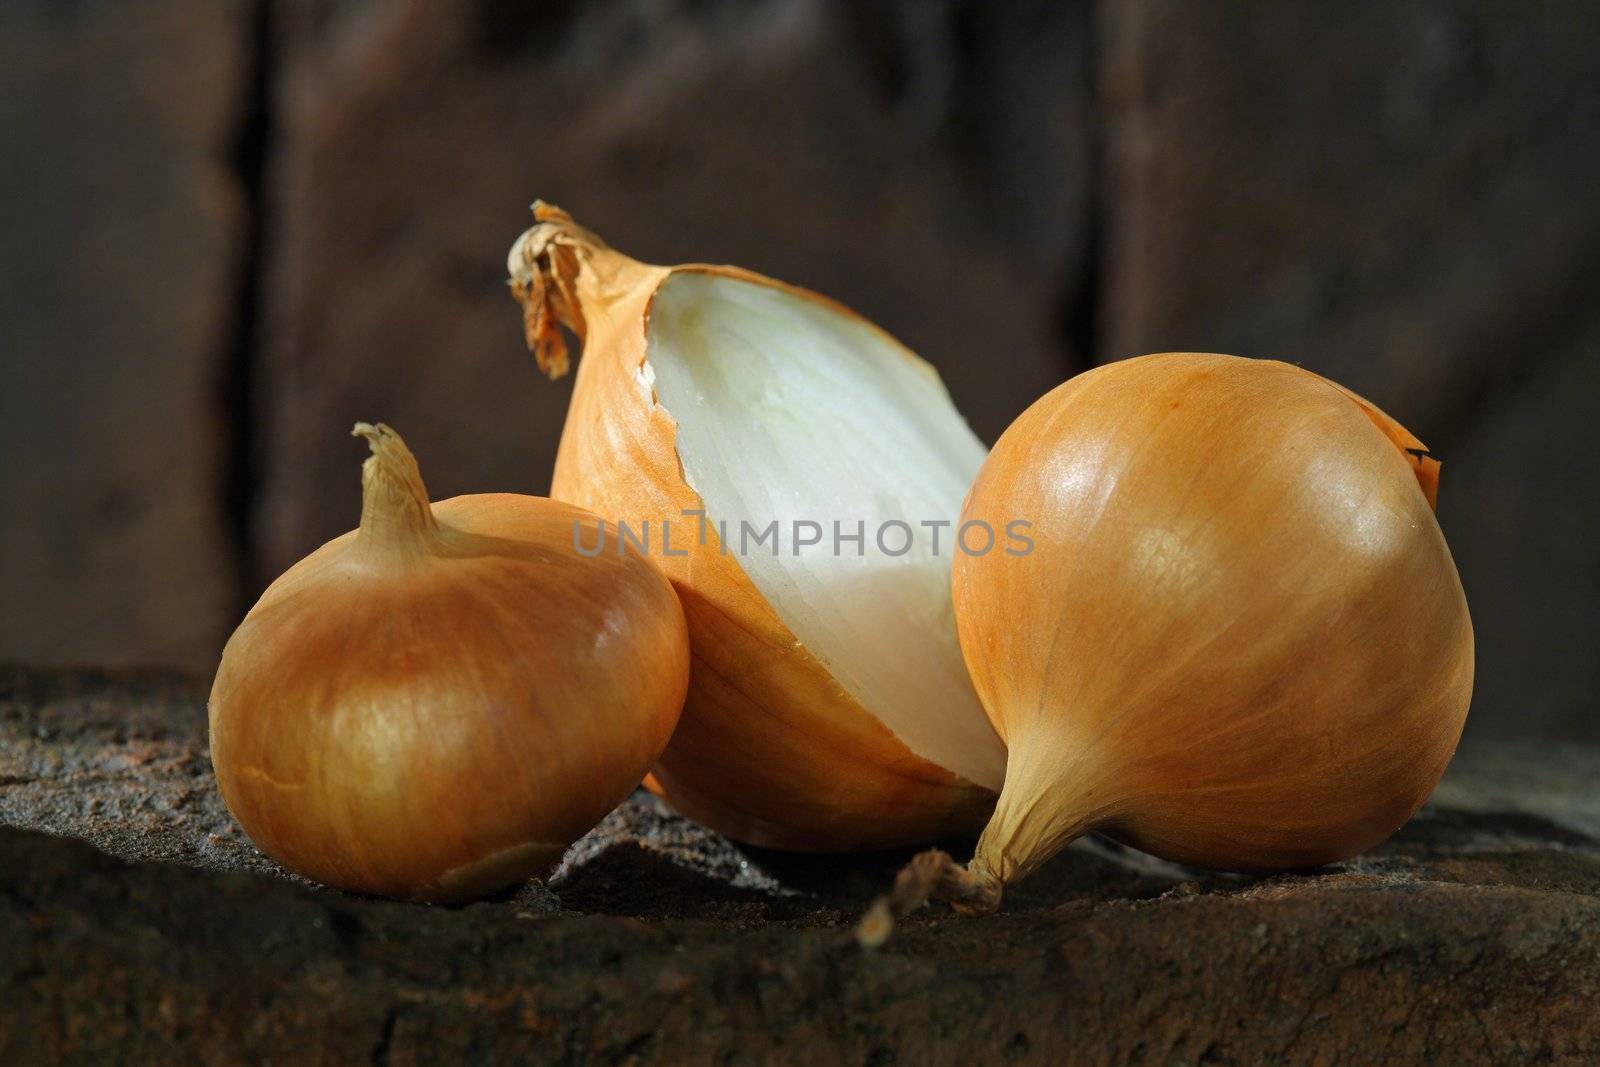 Onions on a brick surface. Short depth of field.